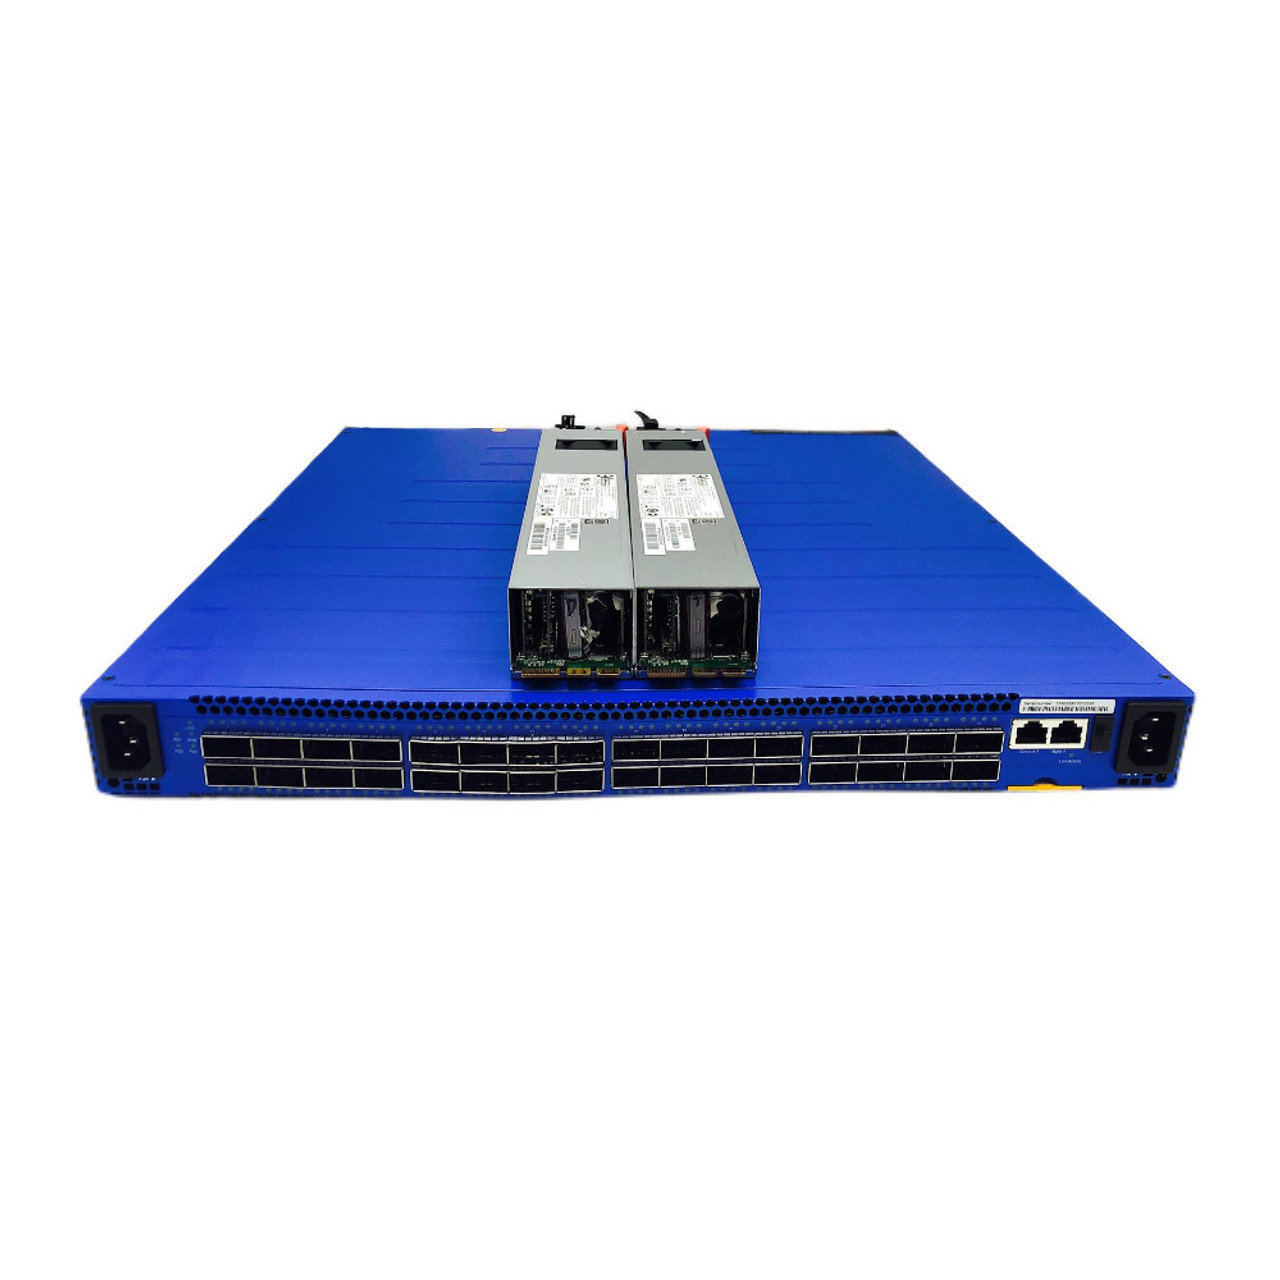 New Edgecore AS7712-32X 32 Port Network Switch